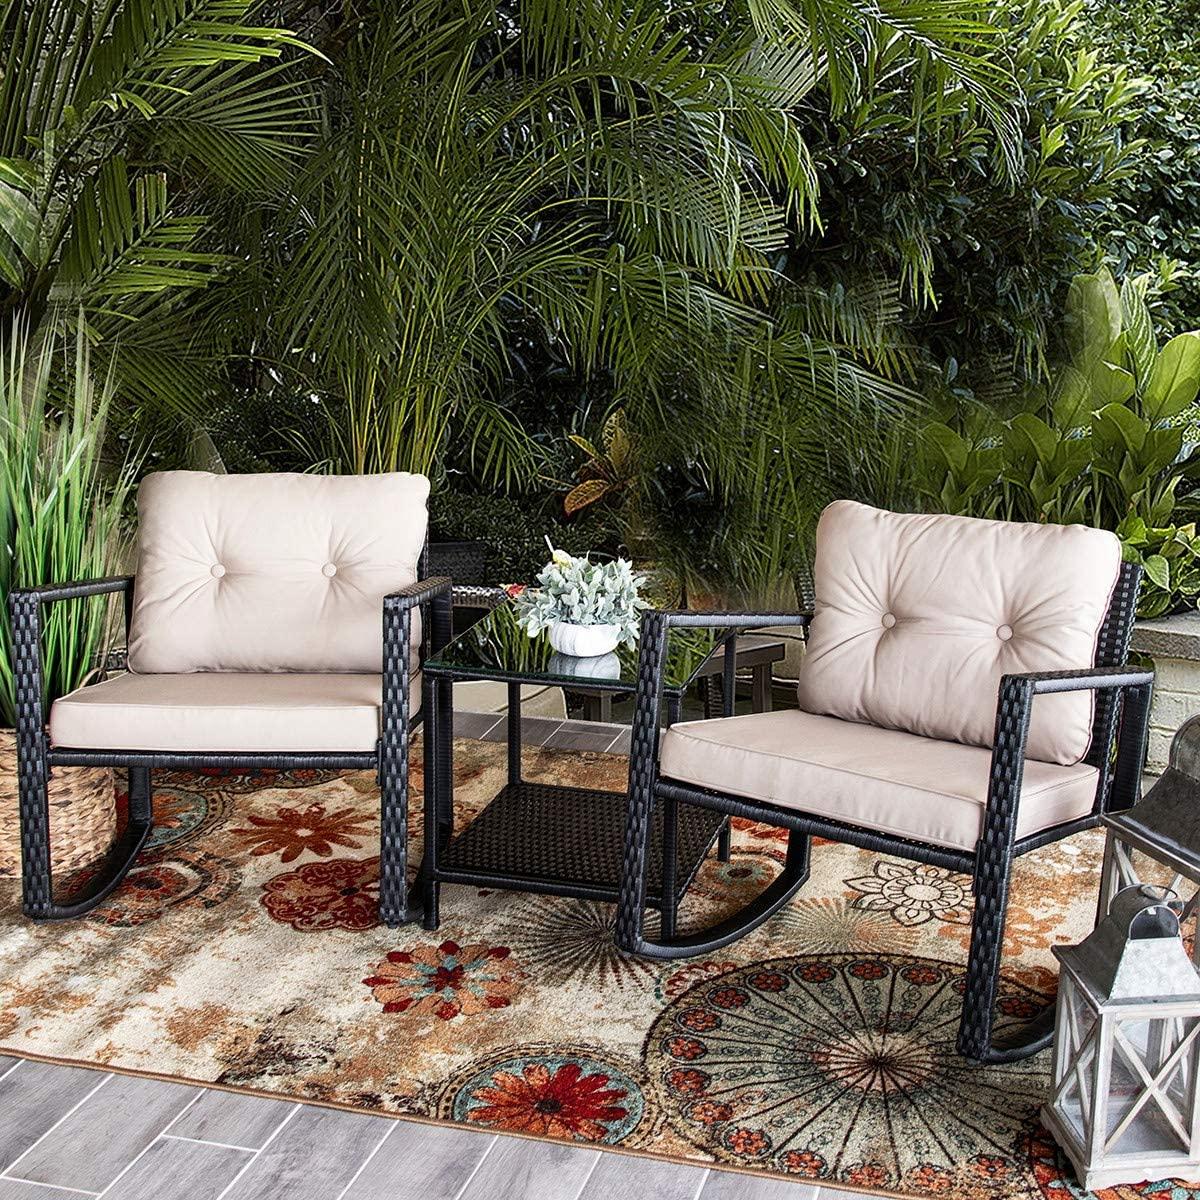 The concept and characteristics of Outdoor Furniture Suppliers